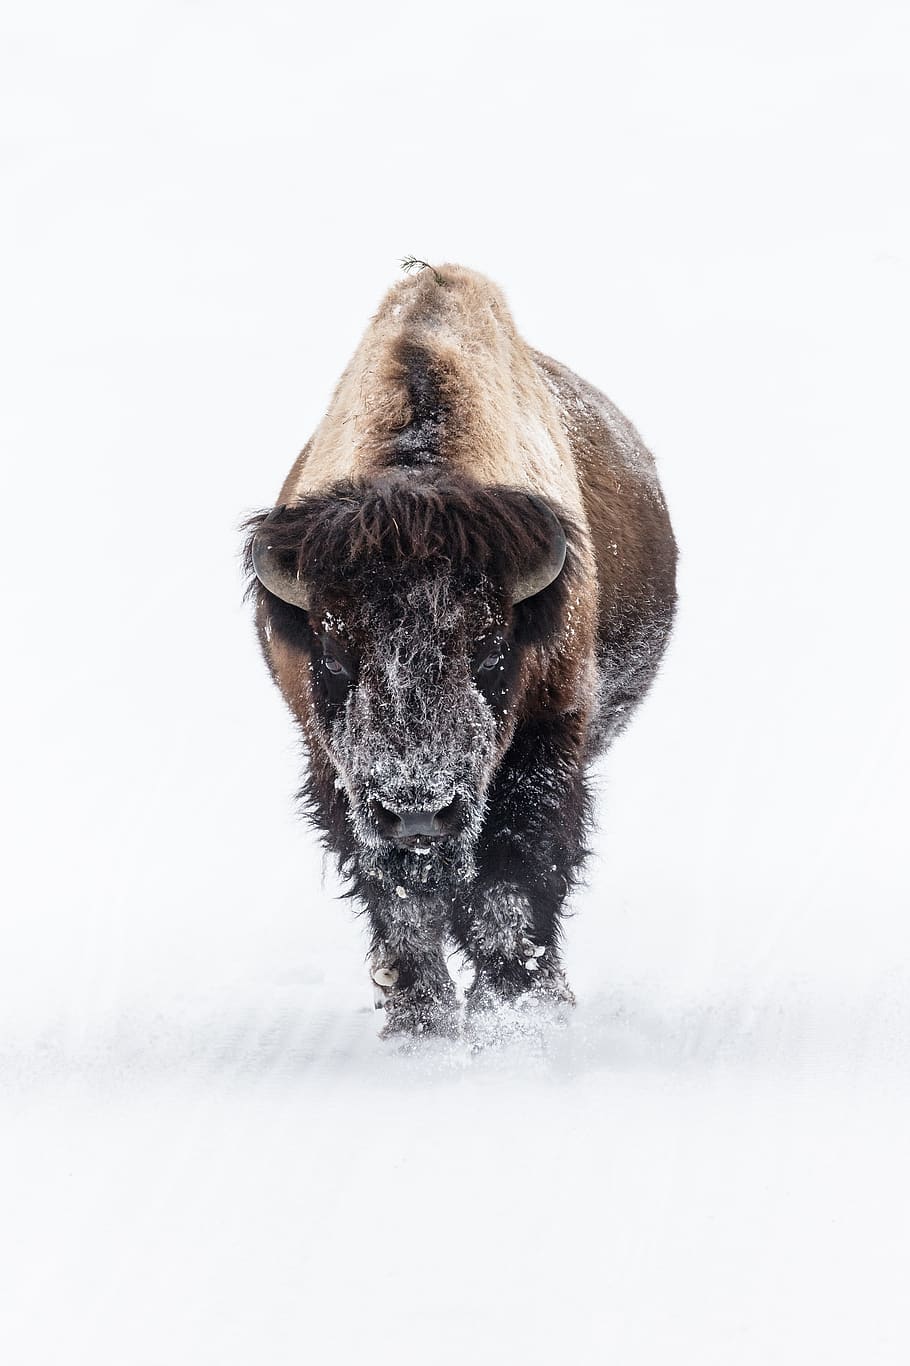 HD wallpaper: bison, buffalo, snow, bull, lone, eating, landscape, outdoors  | Wallpaper Flare